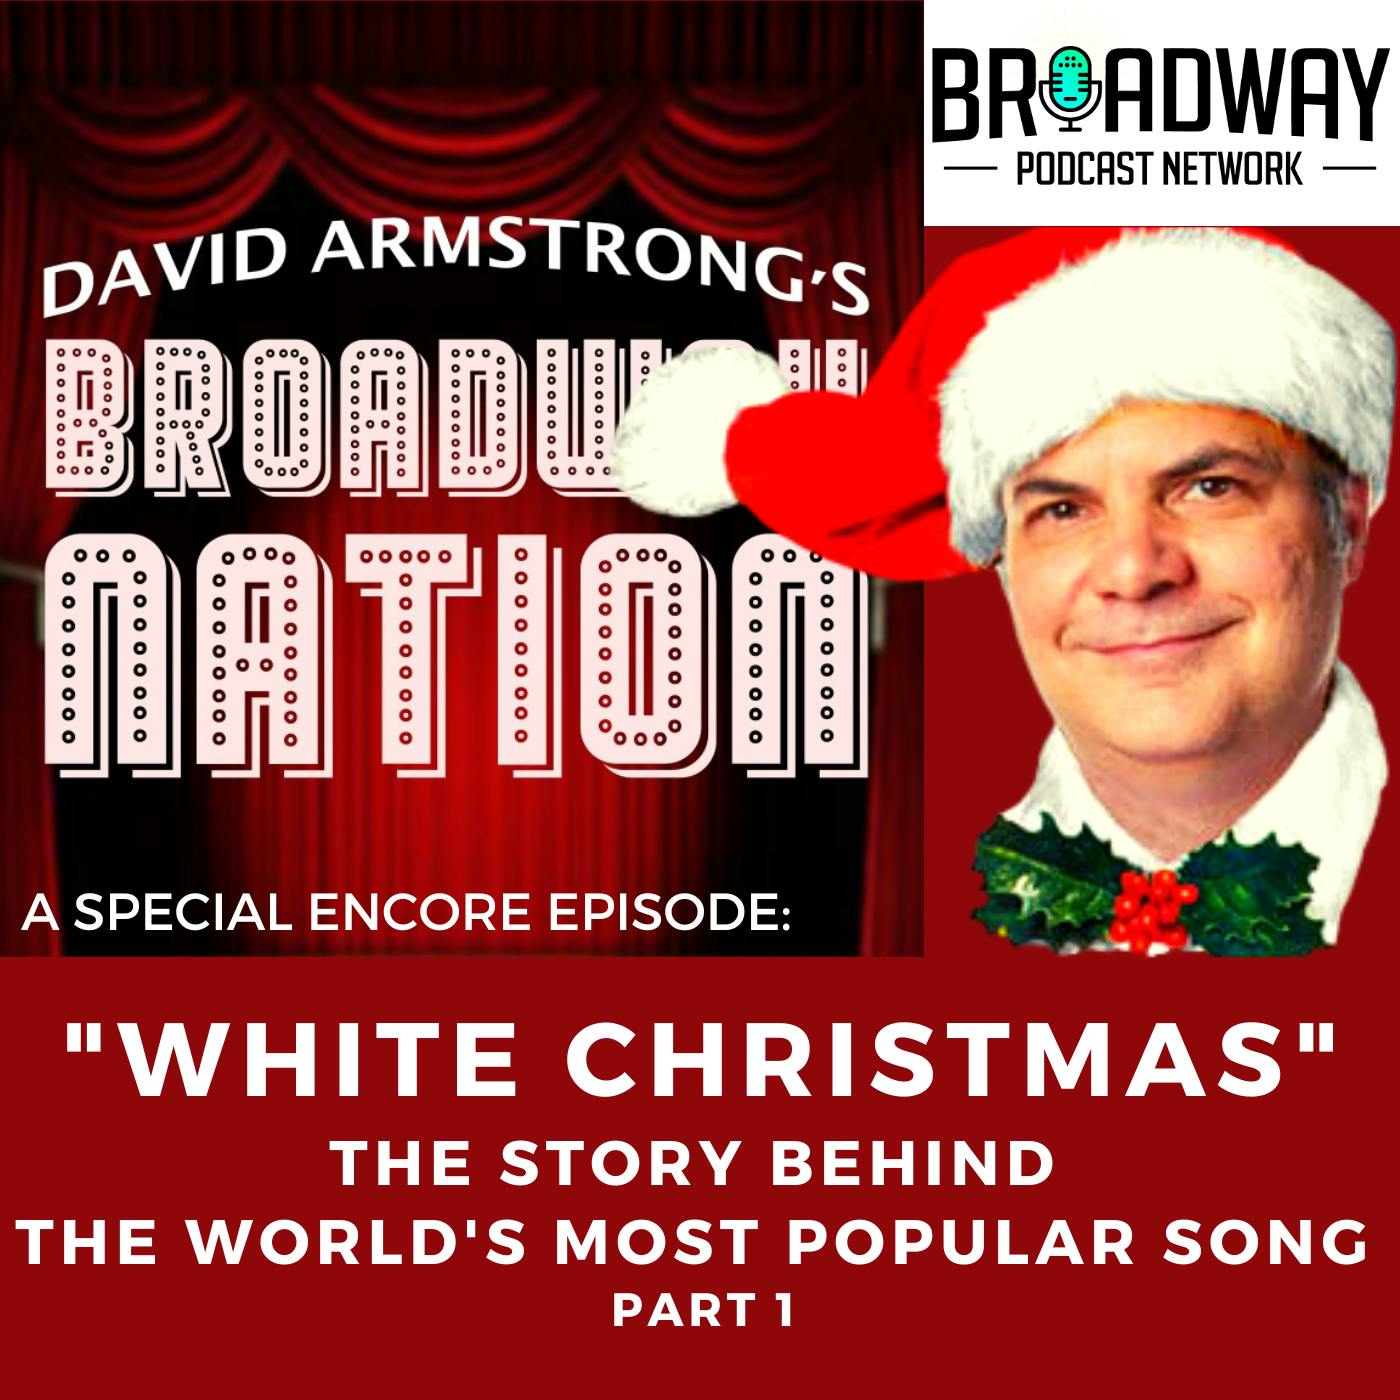 Special Encore Episode: The Story Behind White Christmas, part 1